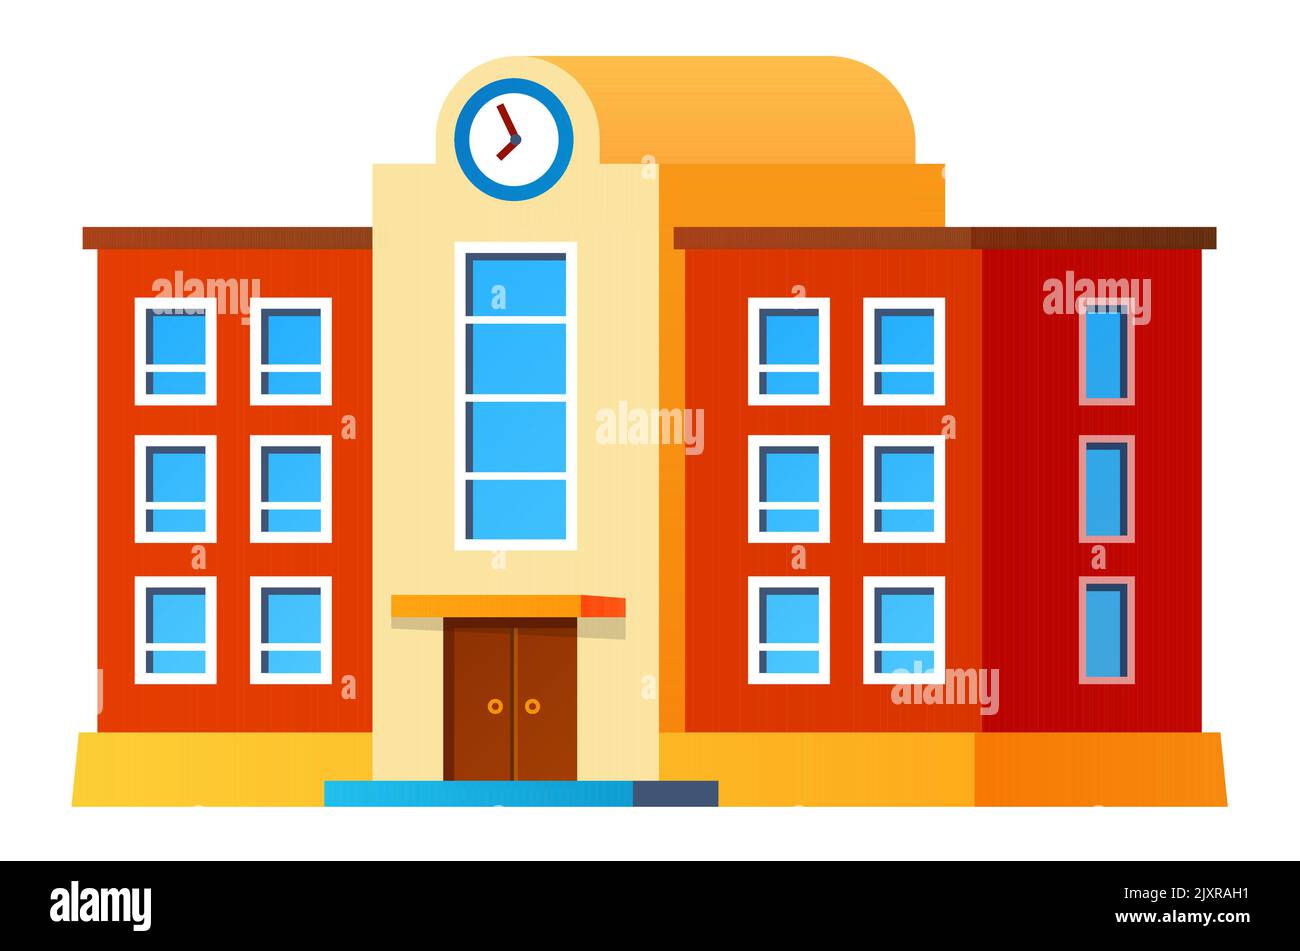 Primary school - modern flat design style single isolated image Stock Vector